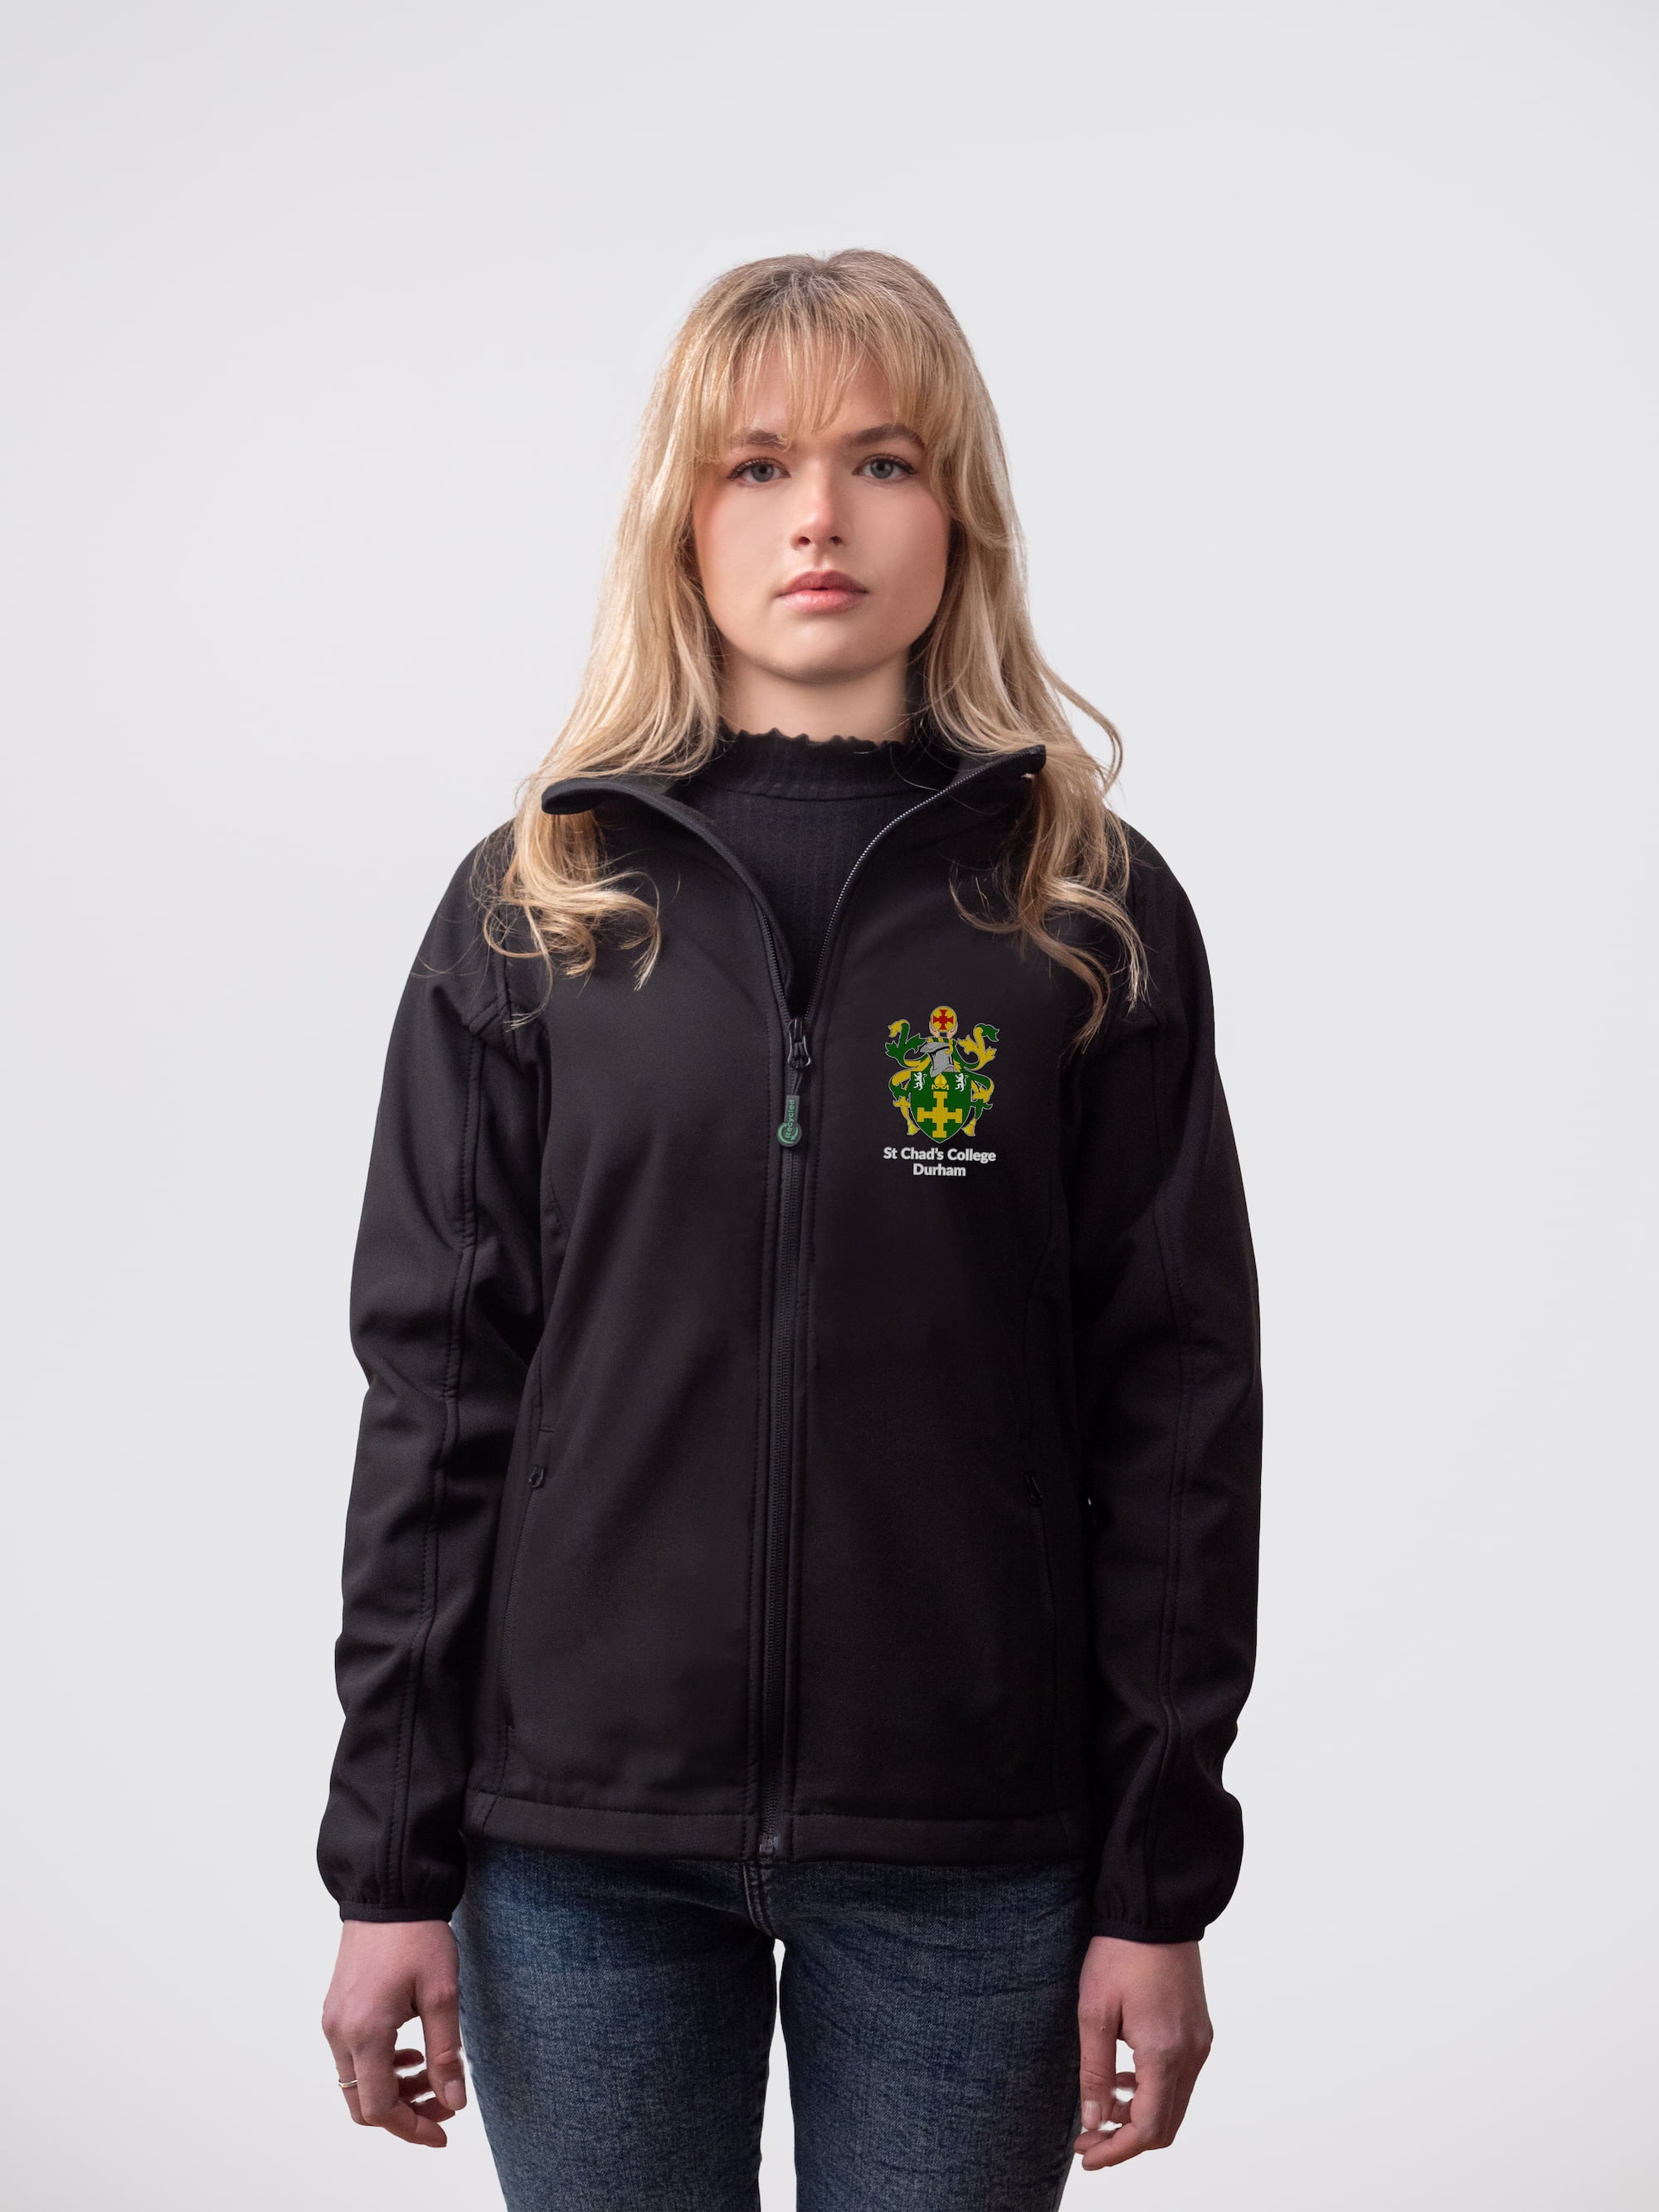 A student wearing a sustainable, St Chad's College embroidered jacket